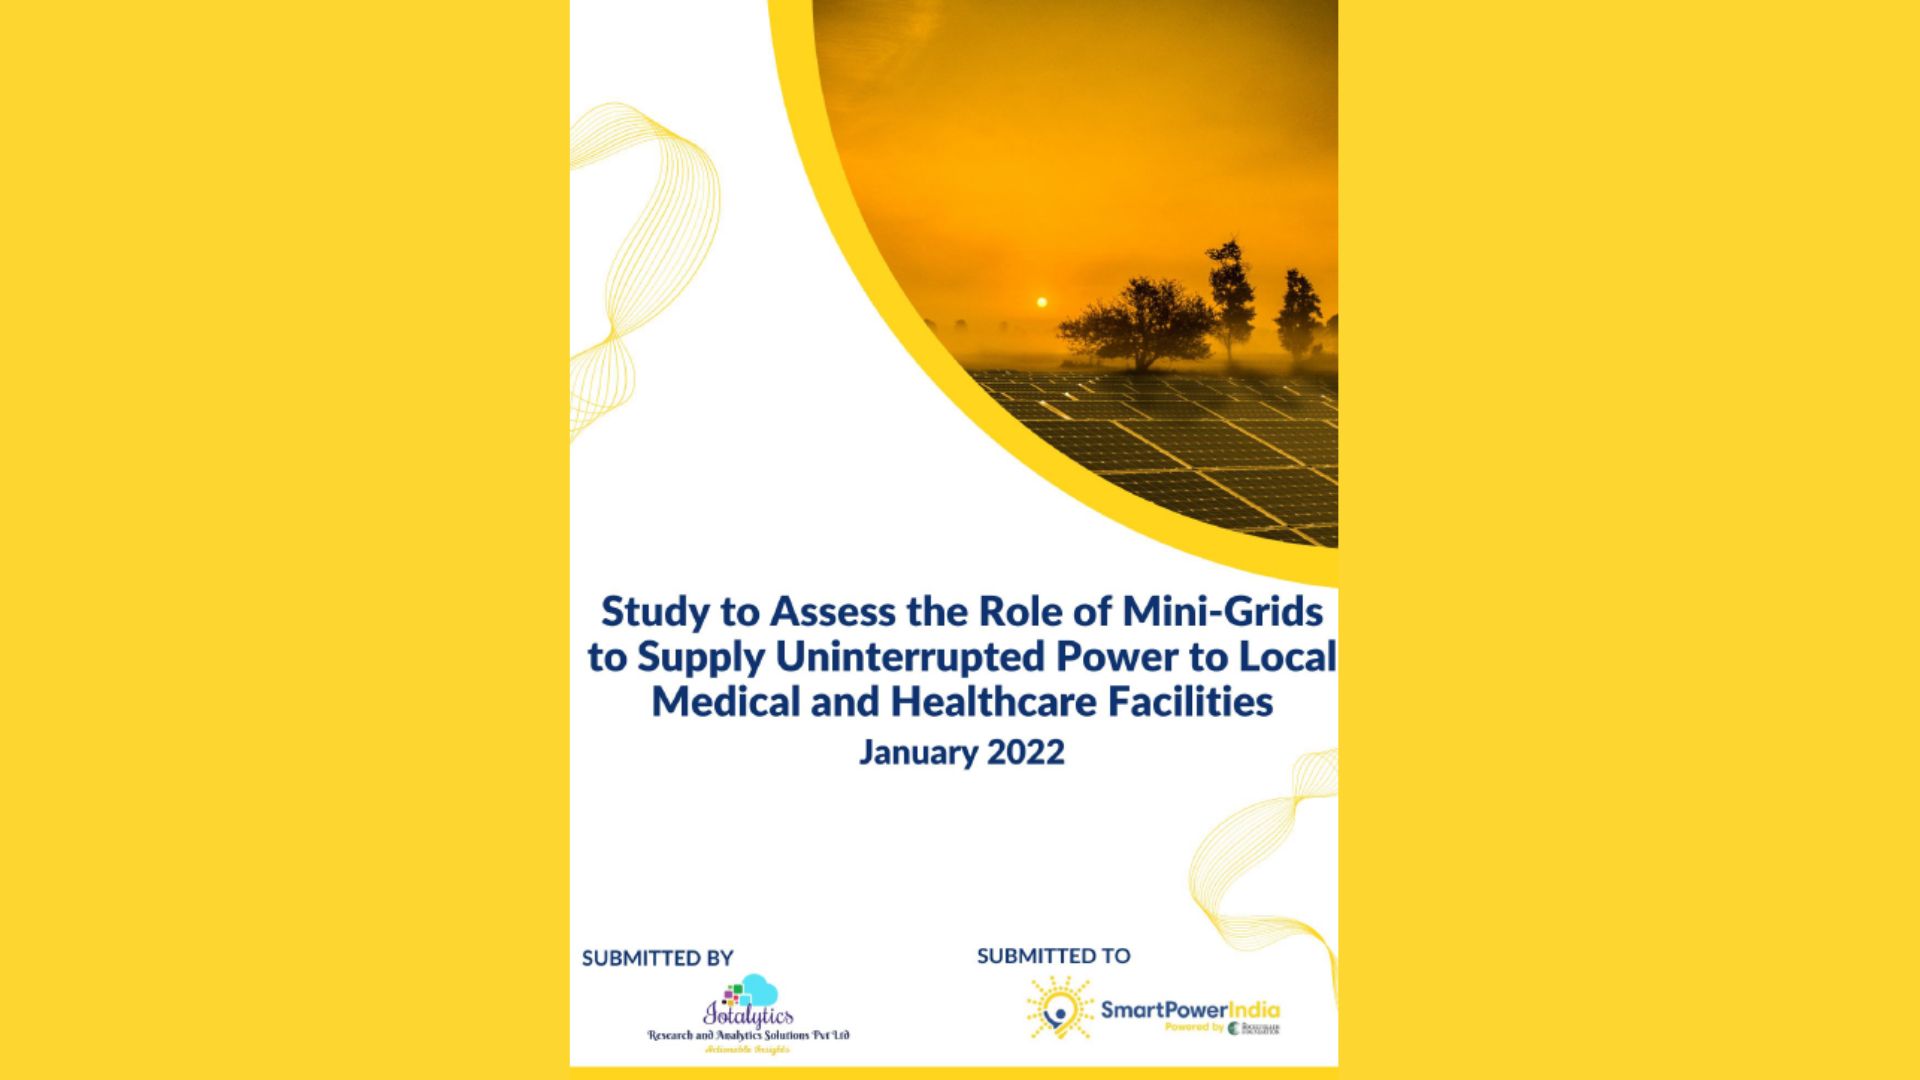 Study to Assess the Role of Mini-Grids to Supply Uninterrupted Power to Local Medical and Healthcare Facilities